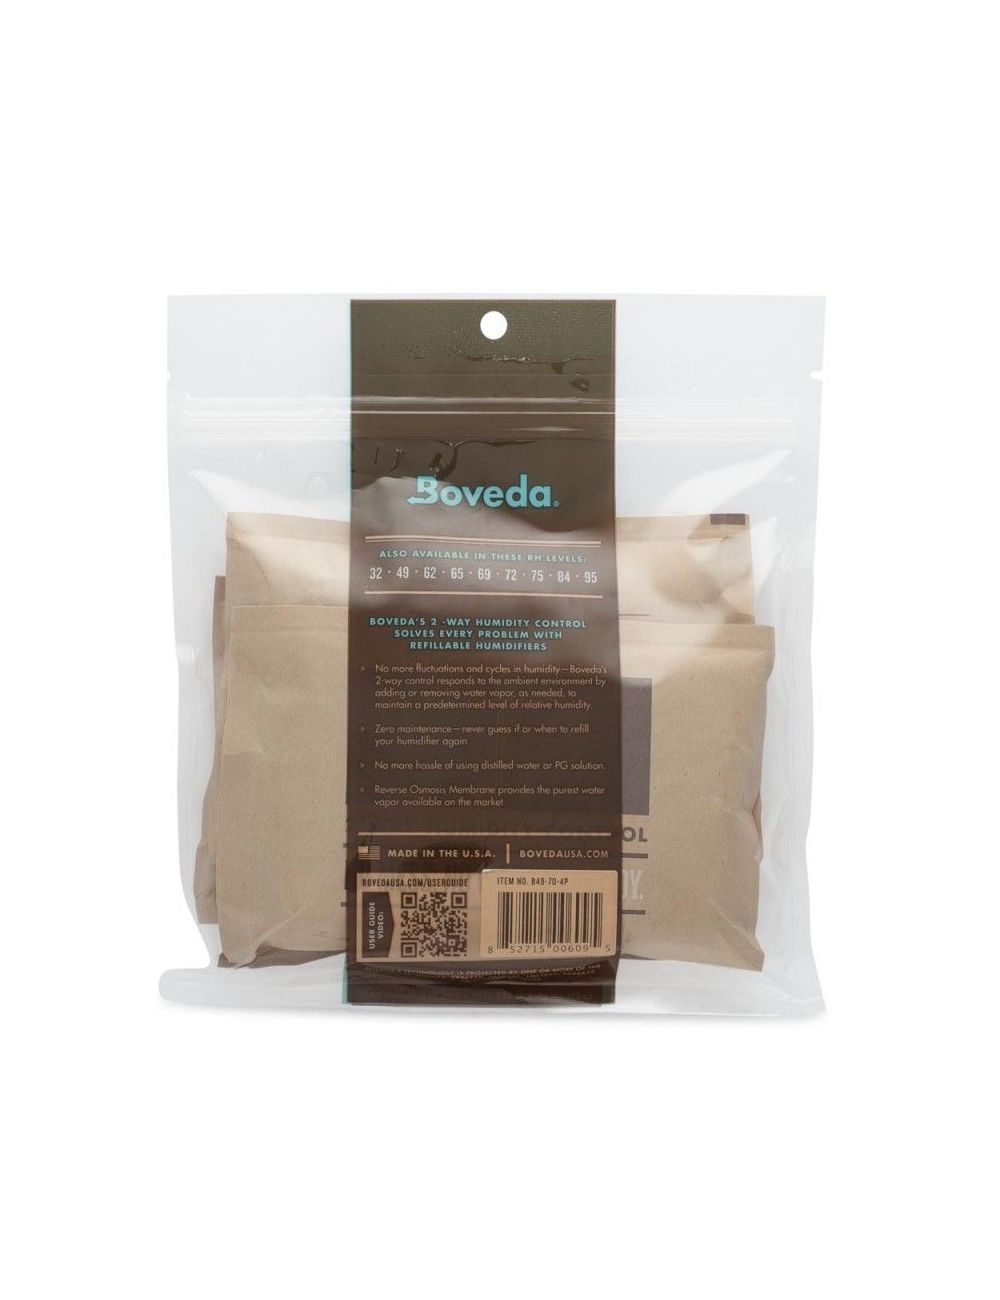 Boveda 4 pack 49 RH humidity control ACCBOP4970 Guitar care